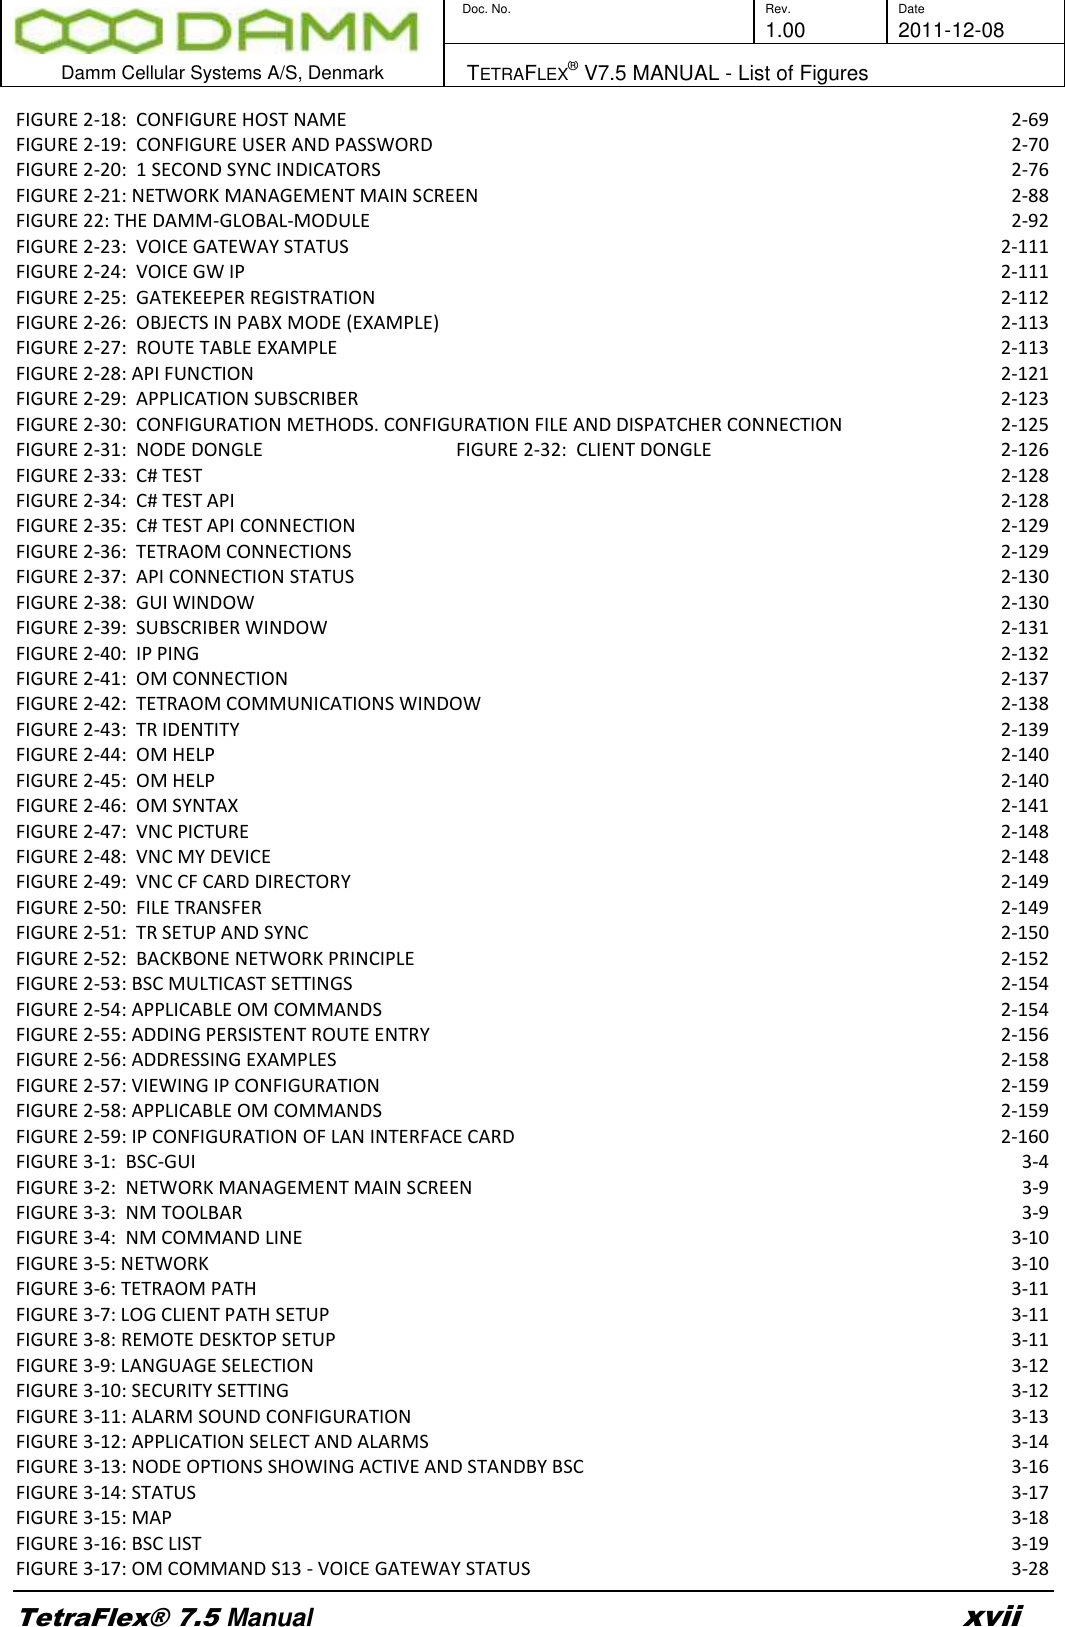        Doc. No. Rev. Date     1.00 2011-12-08  Damm Cellular Systems A/S, Denmark   TETRAFLEX® V7.5 MANUAL - List of Figures  TetraFlex® 7.5 Manual xvii FIGURE 2-18:  CONFIGURE HOST NAME  2-69 FIGURE 2-19:  CONFIGURE USER AND PASSWORD  2-70 FIGURE 2-20:  1 SECOND SYNC INDICATORS  2-76 FIGURE 2-21: NETWORK MANAGEMENT MAIN SCREEN  2-88 FIGURE 22: THE DAMM-GLOBAL-MODULE  2-92 FIGURE 2-23:  VOICE GATEWAY STATUS  2-111 FIGURE 2-24:  VOICE GW IP  2-111 FIGURE 2-25:  GATEKEEPER REGISTRATION  2-112 FIGURE 2-26:  OBJECTS IN PABX MODE (EXAMPLE)  2-113 FIGURE 2-27:  ROUTE TABLE EXAMPLE  2-113 FIGURE 2-28: API FUNCTION  2-121 FIGURE 2-29:  APPLICATION SUBSCRIBER  2-123 FIGURE 2-30:  CONFIGURATION METHODS. CONFIGURATION FILE AND DISPATCHER CONNECTION  2-125 FIGURE 2-31:  NODE DONGLE                                     FIGURE 2-32:  CLIENT DONGLE  2-126 FIGURE 2-33:  C# TEST  2-128 FIGURE 2-34:  C# TEST API  2-128 FIGURE 2-35:  C# TEST API CONNECTION  2-129 FIGURE 2-36:  TETRAOM CONNECTIONS  2-129 FIGURE 2-37:  API CONNECTION STATUS  2-130 FIGURE 2-38:  GUI WINDOW  2-130 FIGURE 2-39:  SUBSCRIBER WINDOW  2-131 FIGURE 2-40:  IP PING  2-132 FIGURE 2-41:  OM CONNECTION  2-137 FIGURE 2-42:  TETRAOM COMMUNICATIONS WINDOW  2-138 FIGURE 2-43:  TR IDENTITY  2-139 FIGURE 2-44:  OM HELP  2-140 FIGURE 2-45:  OM HELP  2-140 FIGURE 2-46:  OM SYNTAX  2-141 FIGURE 2-47:  VNC PICTURE  2-148 FIGURE 2-48:  VNC MY DEVICE  2-148 FIGURE 2-49:  VNC CF CARD DIRECTORY  2-149 FIGURE 2-50:  FILE TRANSFER  2-149 FIGURE 2-51:  TR SETUP AND SYNC  2-150 FIGURE 2-52:  BACKBONE NETWORK PRINCIPLE  2-152 FIGURE 2-53: BSC MULTICAST SETTINGS  2-154 FIGURE 2-54: APPLICABLE OM COMMANDS  2-154 FIGURE 2-55: ADDING PERSISTENT ROUTE ENTRY  2-156 FIGURE 2-56: ADDRESSING EXAMPLES  2-158 FIGURE 2-57: VIEWING IP CONFIGURATION  2-159 FIGURE 2-58: APPLICABLE OM COMMANDS  2-159 FIGURE 2-59: IP CONFIGURATION OF LAN INTERFACE CARD  2-160 FIGURE 3-1:  BSC-GUI  3-4 FIGURE 3-2:  NETWORK MANAGEMENT MAIN SCREEN  3-9 FIGURE 3-3:  NM TOOLBAR  3-9 FIGURE 3-4:  NM COMMAND LINE  3-10 FIGURE 3-5: NETWORK  3-10 FIGURE 3-6: TETRAOM PATH  3-11 FIGURE 3-7: LOG CLIENT PATH SETUP  3-11 FIGURE 3-8: REMOTE DESKTOP SETUP  3-11 FIGURE 3-9: LANGUAGE SELECTION  3-12 FIGURE 3-10: SECURITY SETTING  3-12 FIGURE 3-11: ALARM SOUND CONFIGURATION  3-13 FIGURE 3-12: APPLICATION SELECT AND ALARMS  3-14 FIGURE 3-13: NODE OPTIONS SHOWING ACTIVE AND STANDBY BSC  3-16 FIGURE 3-14: STATUS  3-17 FIGURE 3-15: MAP  3-18 FIGURE 3-16: BSC LIST  3-19 FIGURE 3-17: OM COMMAND S13 - VOICE GATEWAY STATUS  3-28 